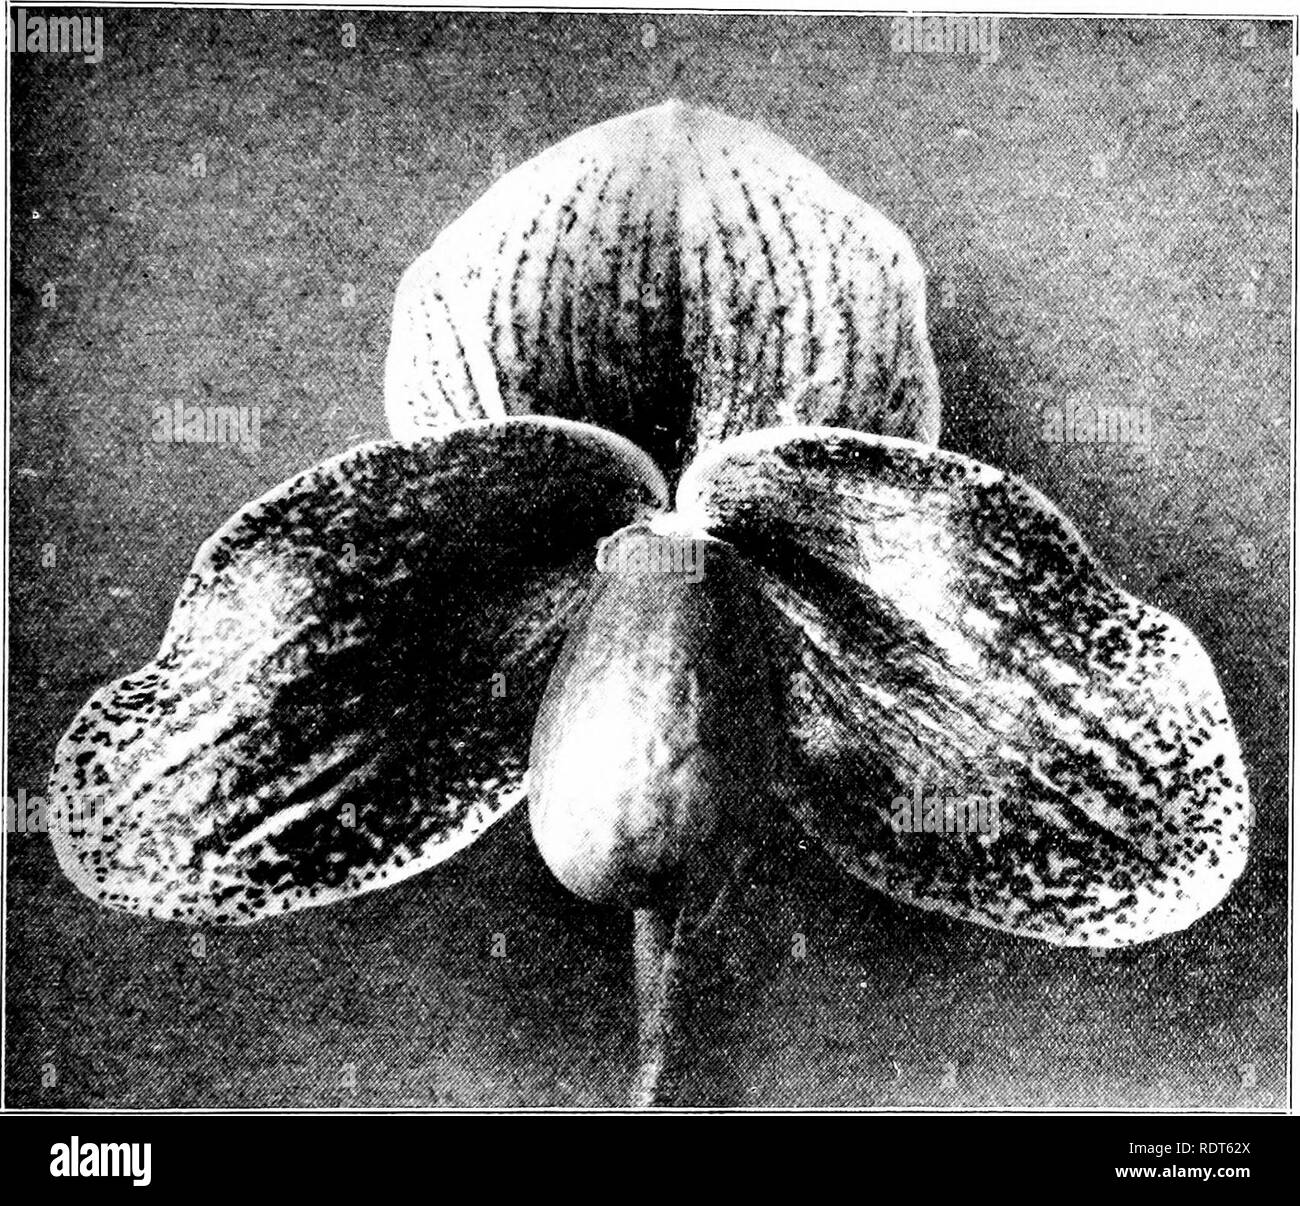 . The orchid stud-book: an enumeration of hybrid orchids of artificial origin, with their parents, raisers, date of first flowering, references to descriptions and figures, and synonymy. With an historical introduction and 120 figures and a chapter on hybridising and raising orchids from seed. Orchids. Part II. Suppl. THE ORCHID STUD-BOOK. 301 300. P. x Iphis (p. 169). C. x Argo-tonsum, G.C. 1904, ii. 324 ; O.K. 1904, 363.—Goodson. 307. P. x Jeanette (p. 169). C. x Grace Pitt, G.C. 1905, ii.21S ; O.R. 1905, 307.—Pitt. C. x Closonianum, Rev. H. Beige, 1906, 23. — Lambeau. 308a. P. x Jerninghami Stock Photo